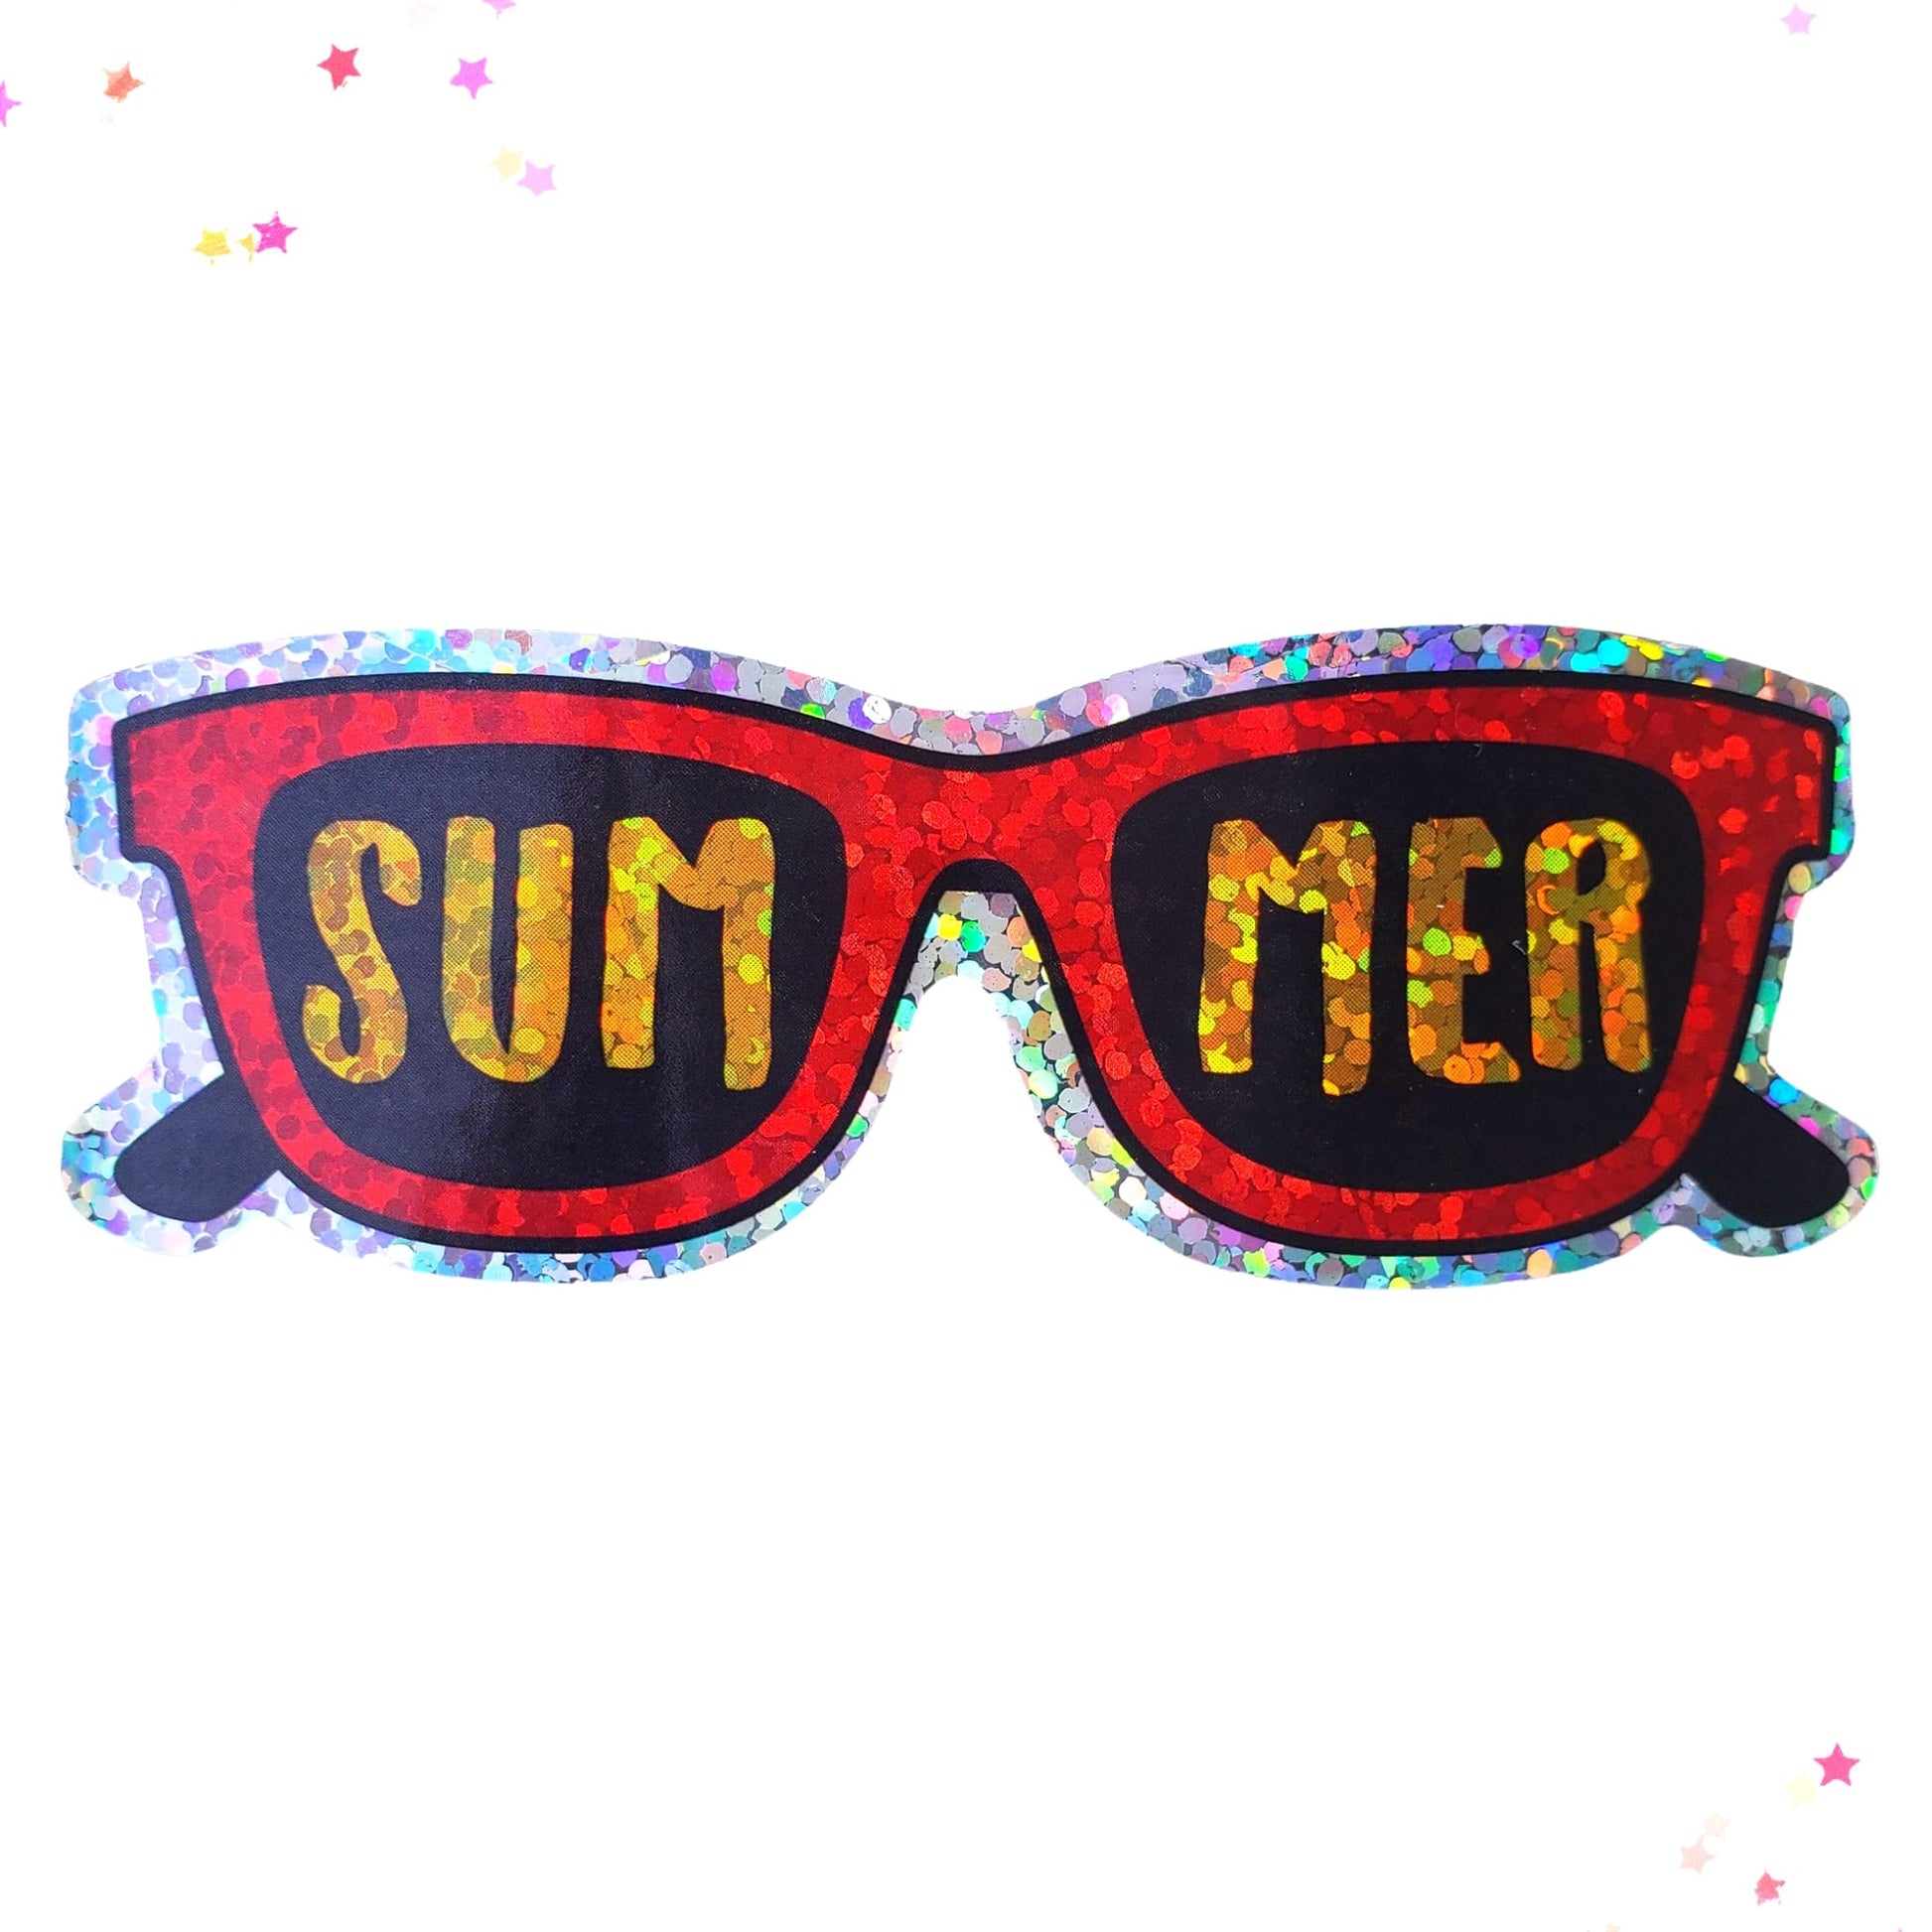 Premium Sticker - Sparkly Holographic Glitter Summer Sunglasses from Confetti Kitty, Only 2.00